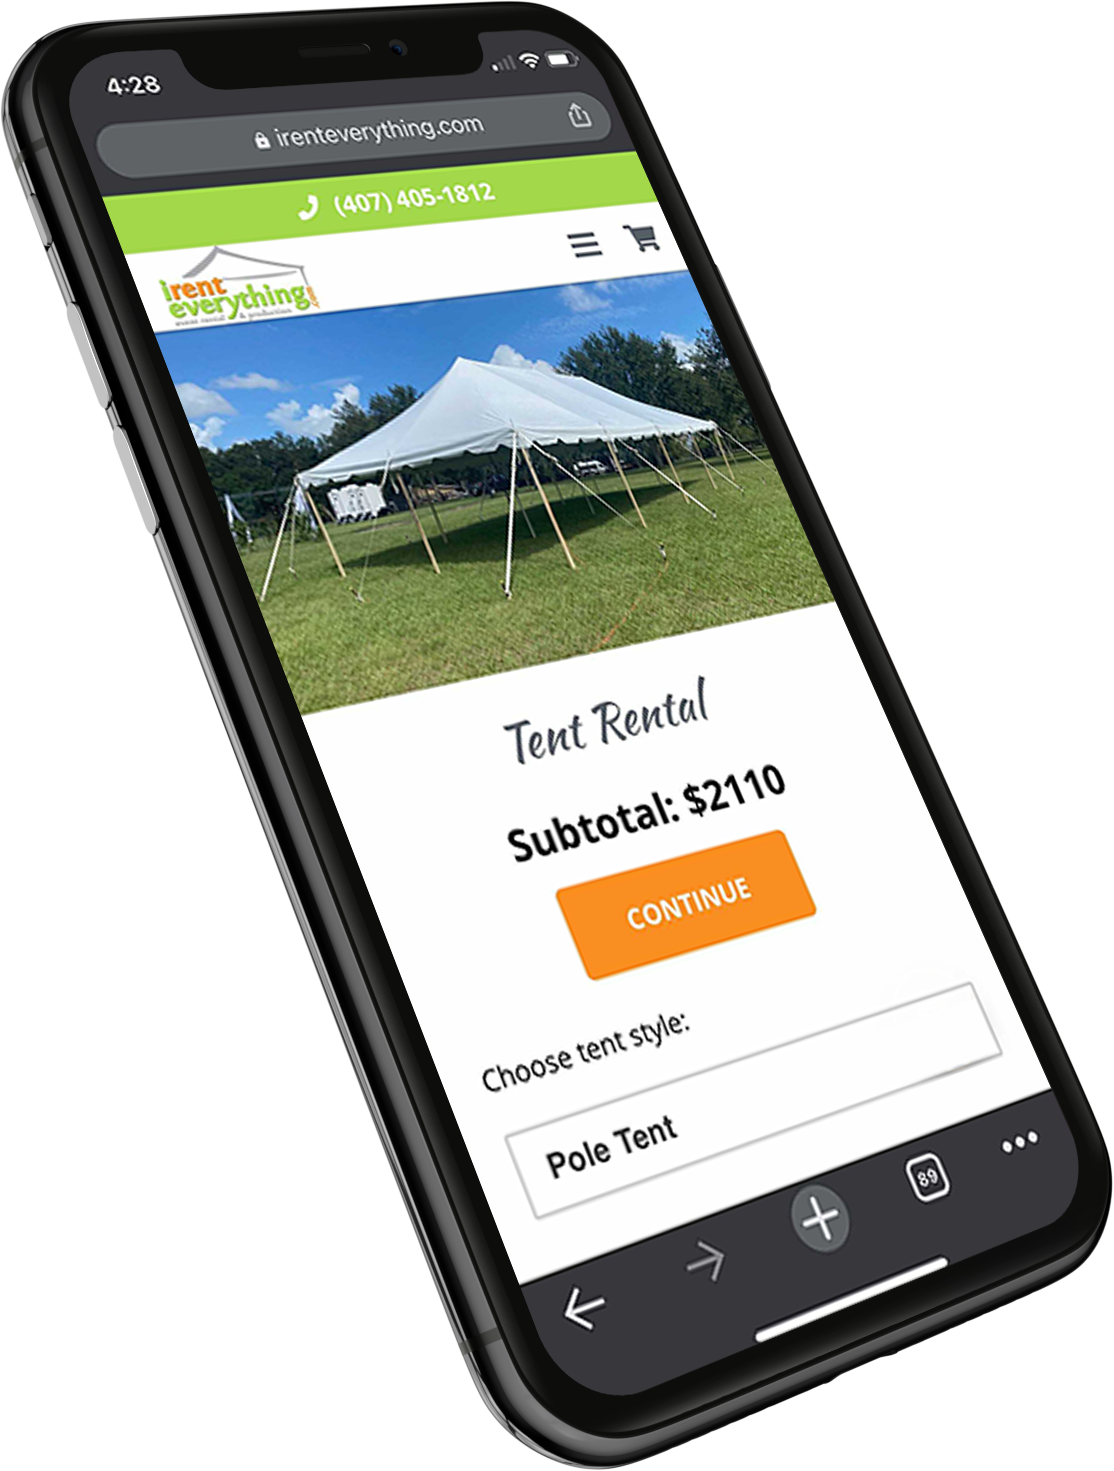 iPhone graphic showing the online tent rental tool